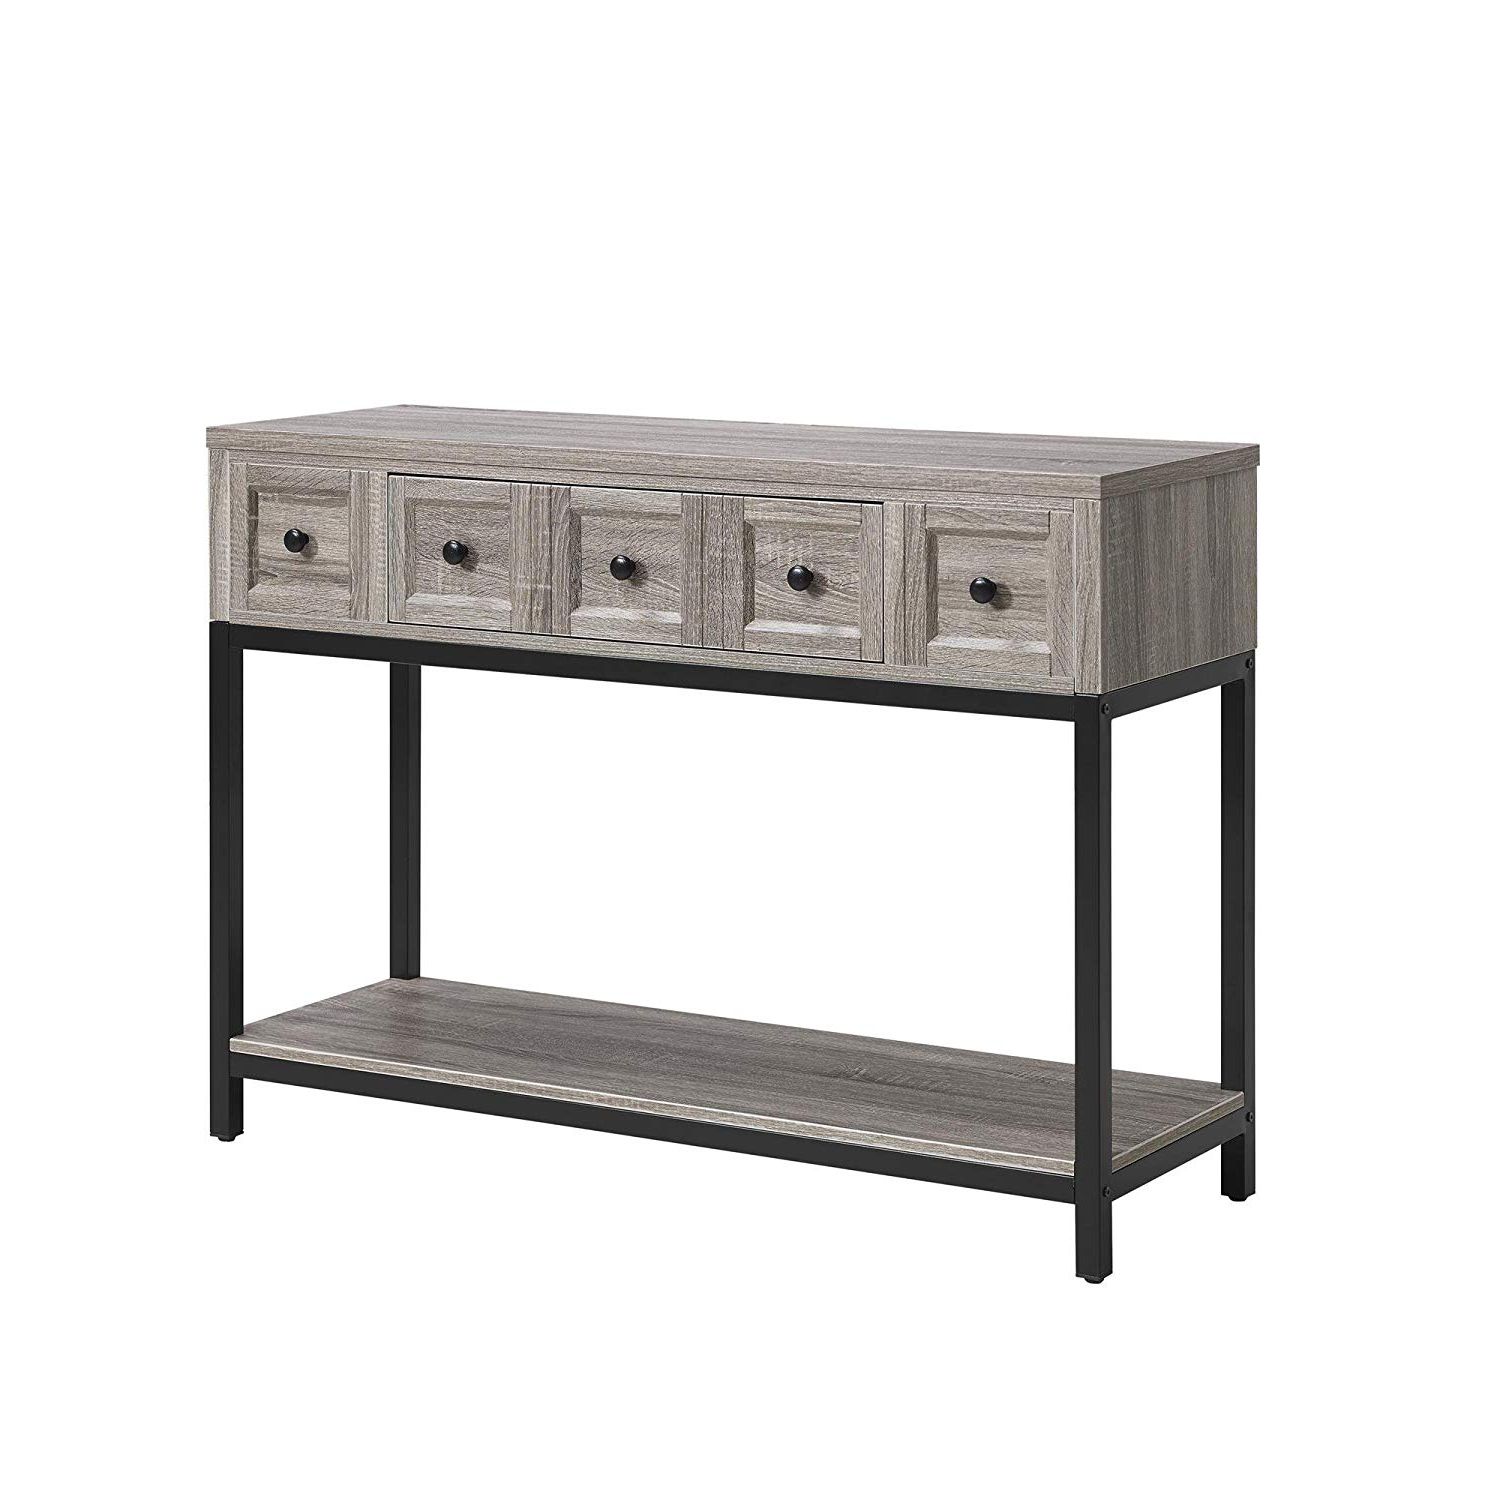 Parsons Walnut Top & Dark Steel Base 48x16 Console Tables In Favorite Amazon: Altra Furniture Console Table In Sonoma Oak Finish (View 5 of 20)